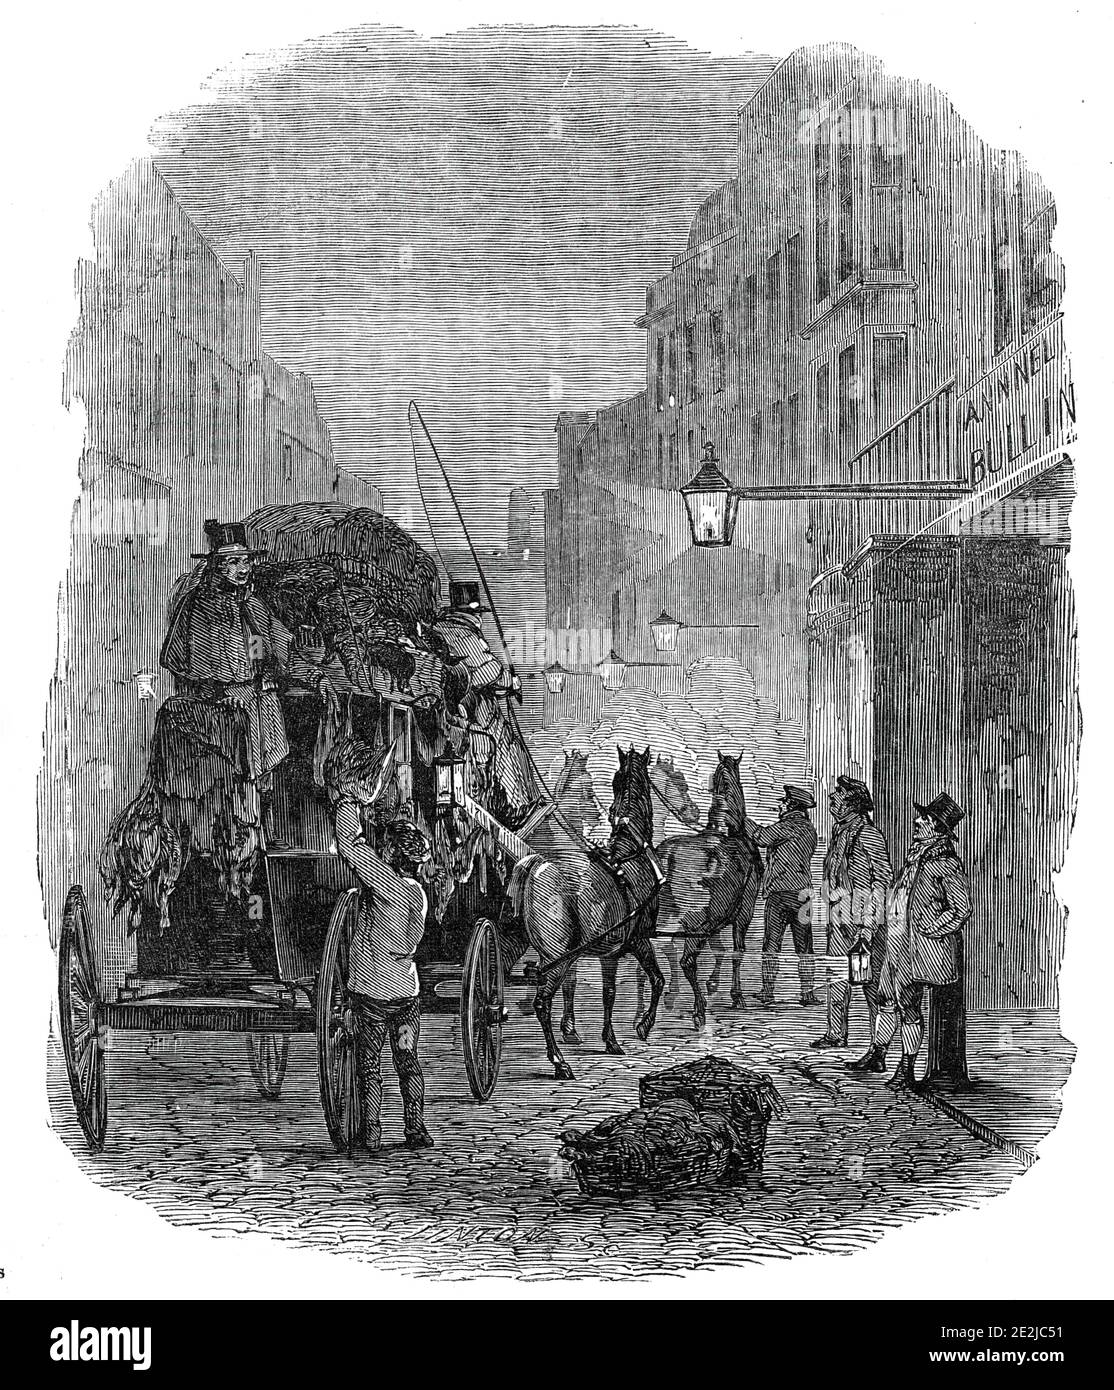 Norfolk Coach, 1845. Goods are loaded onto a former passenger coach outside The Bull Inn. 'The Norfolk Coach may almost be termed a relic of other days, so nearly has the railway locomotive superseded the stage coach. There are many of these vehicles to spare for such purposes as that shown in our Illustration; where geese are inside passengers'. From &quot;Illustrated London News&quot;, 1845, Vol VII. Stock Photo